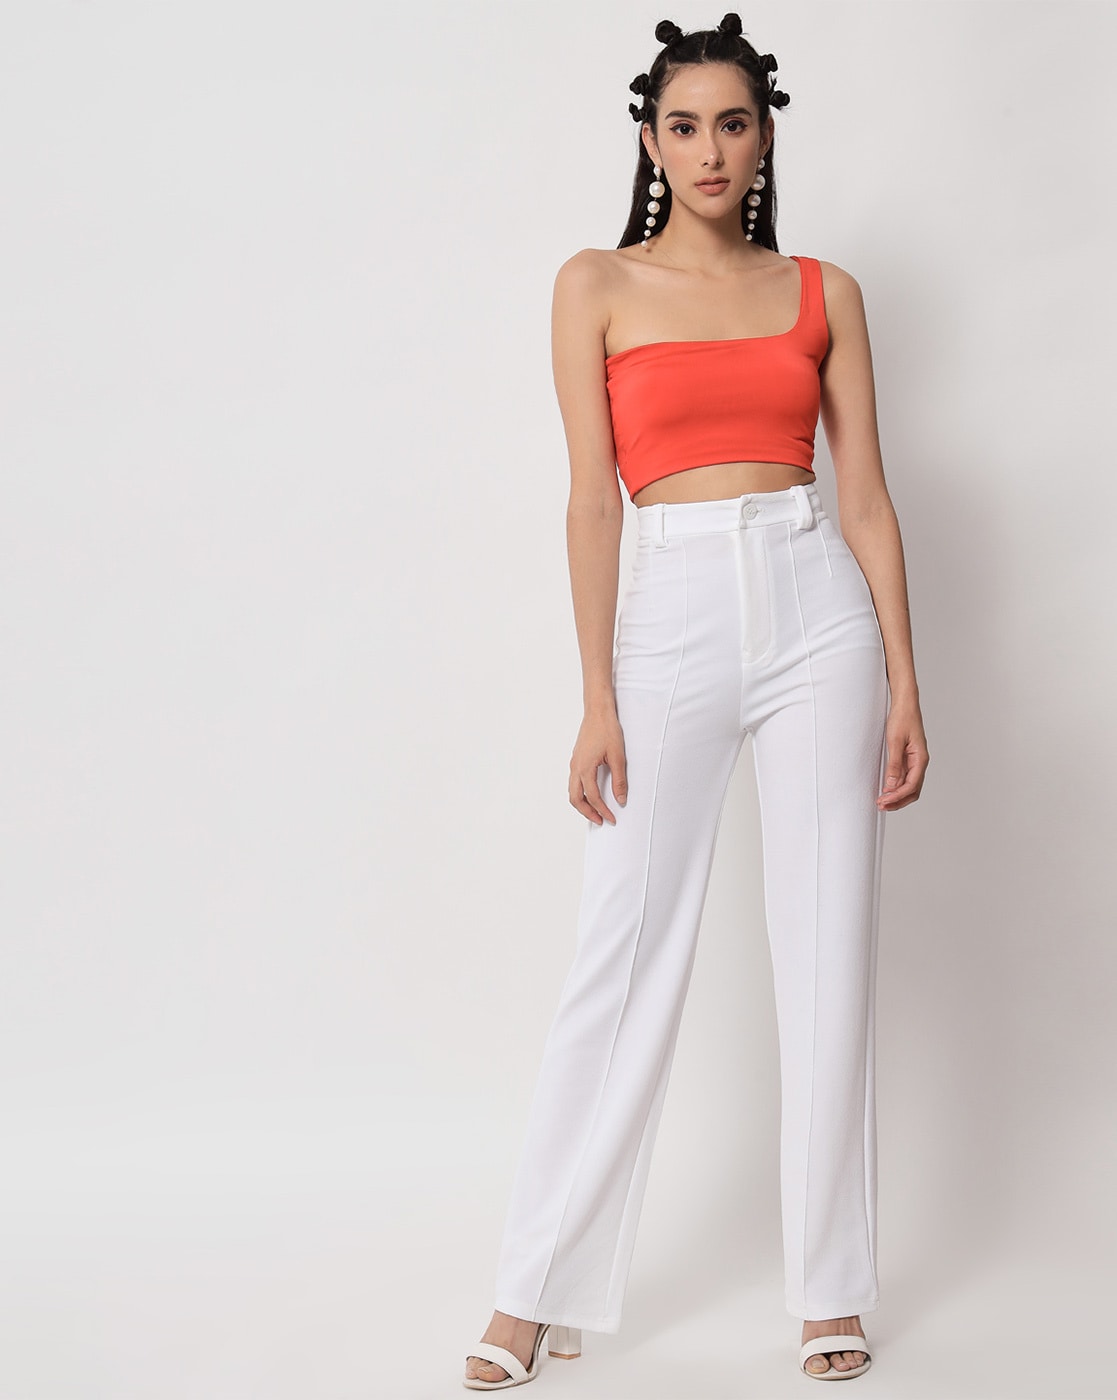 White Silk Pants for Women Ivory White Ankle Tapered Pants High Waist Pleated  Pants With Pockets 